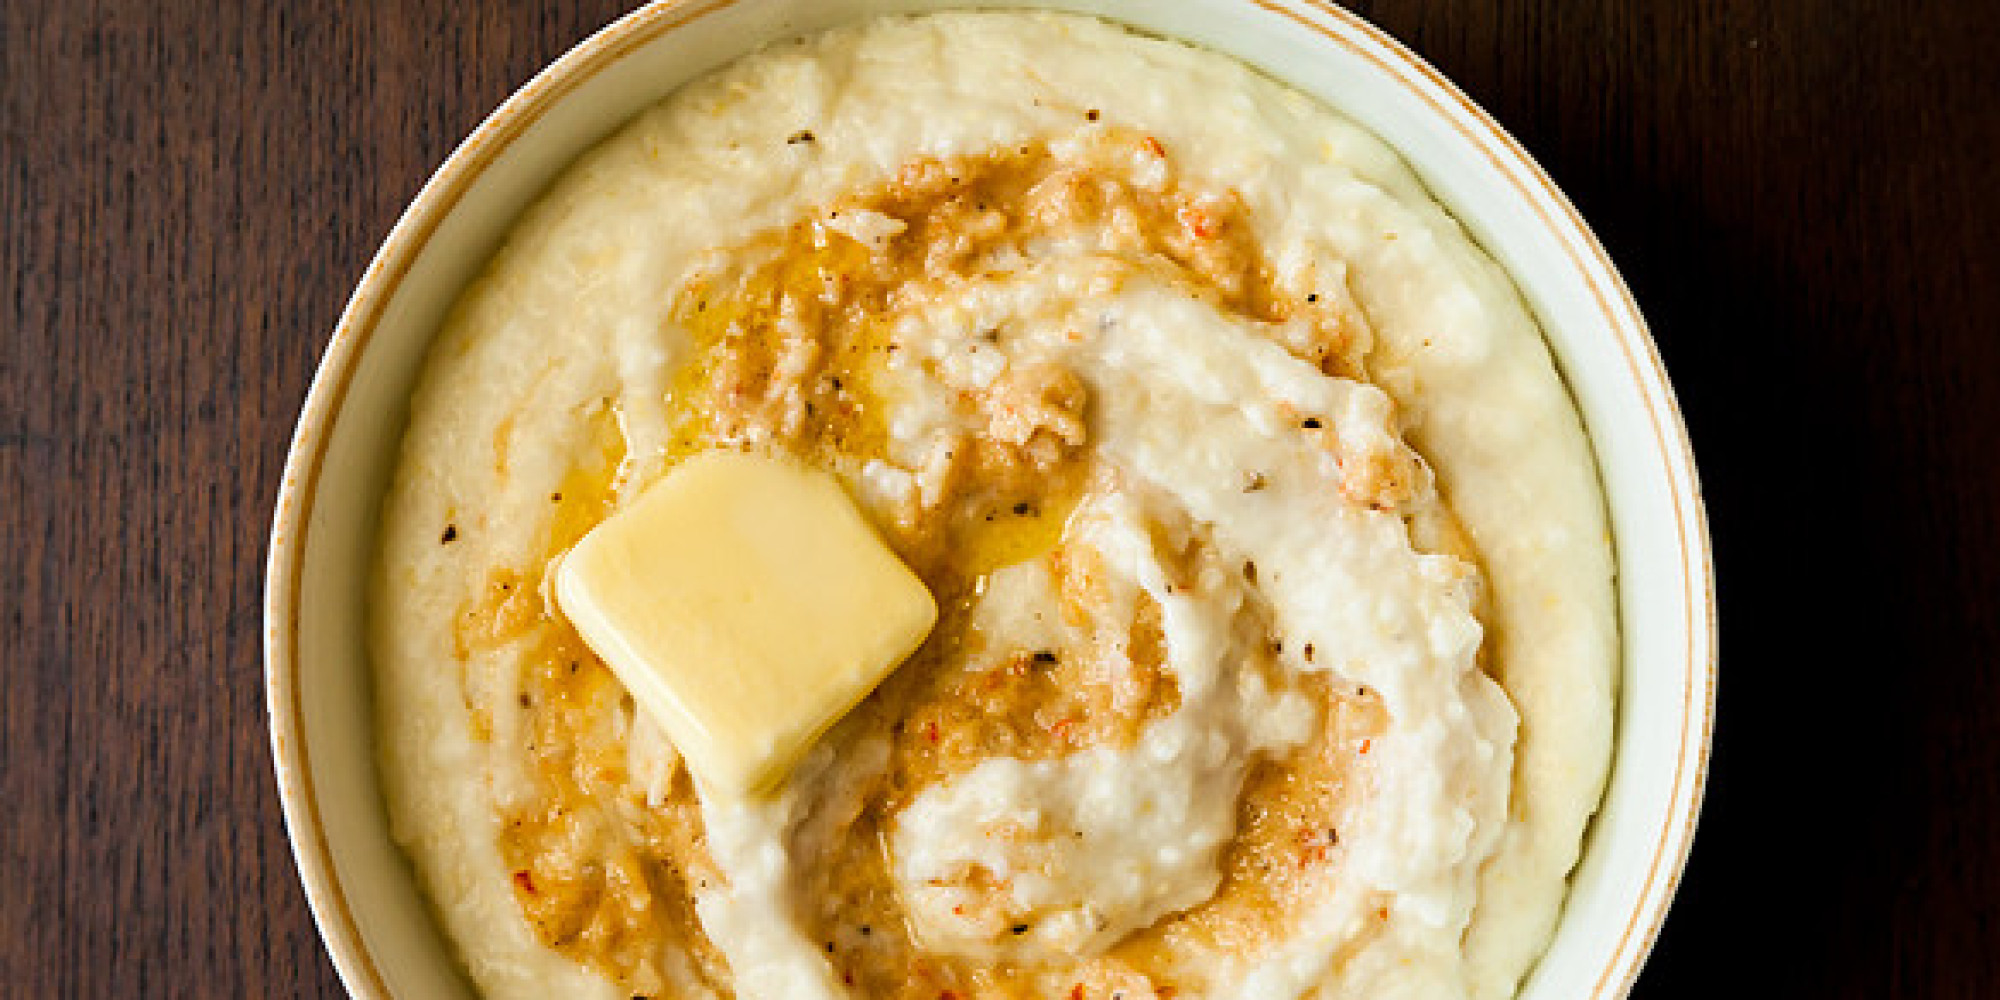 Grits Recipes Aren't Just For Breakfast Anymore (PHOTOS)